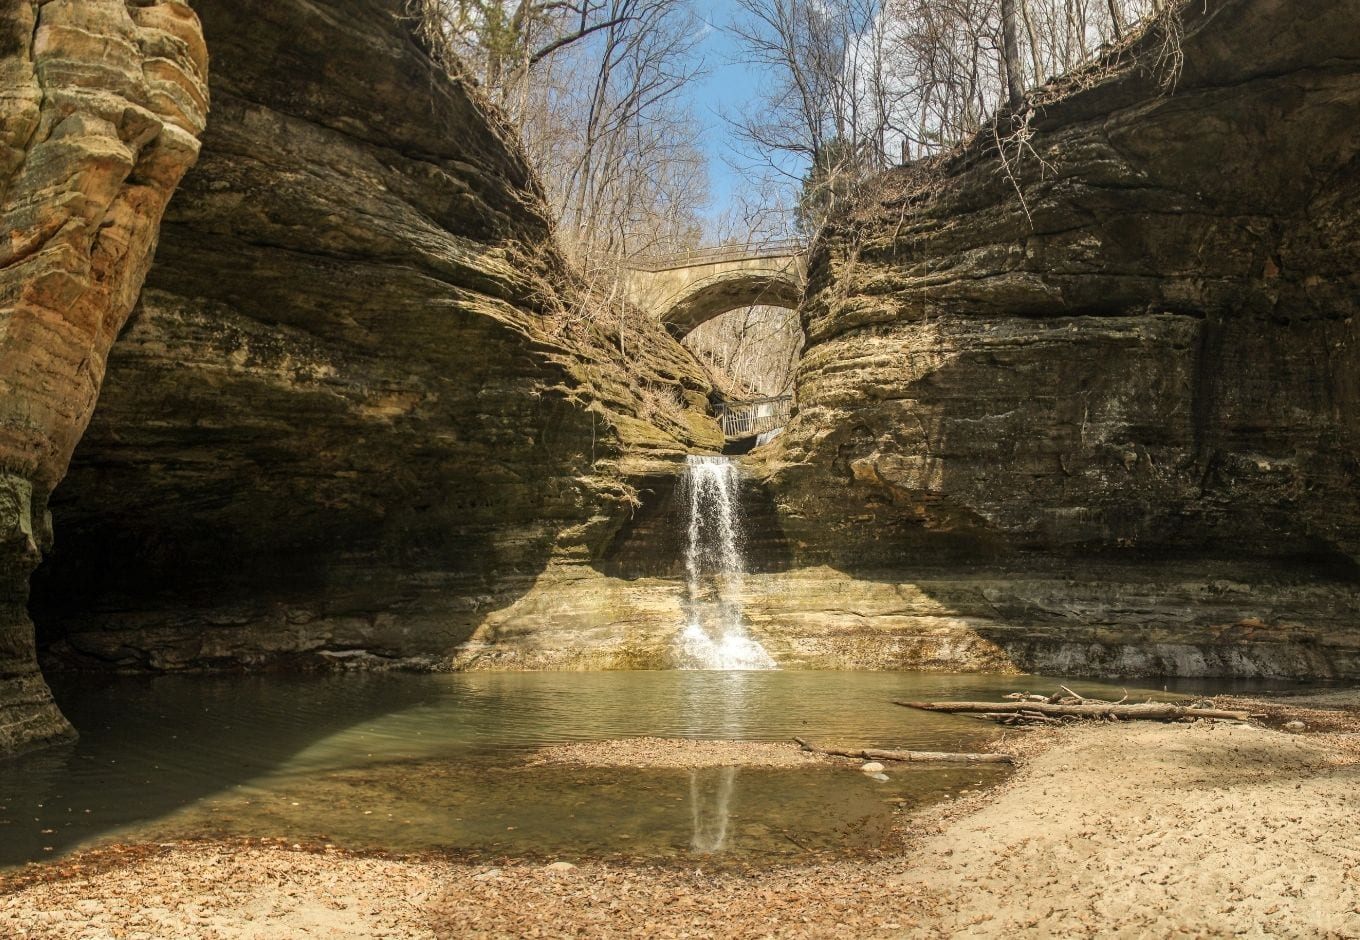 Tiny waterfall in Oglesby, Illinois.